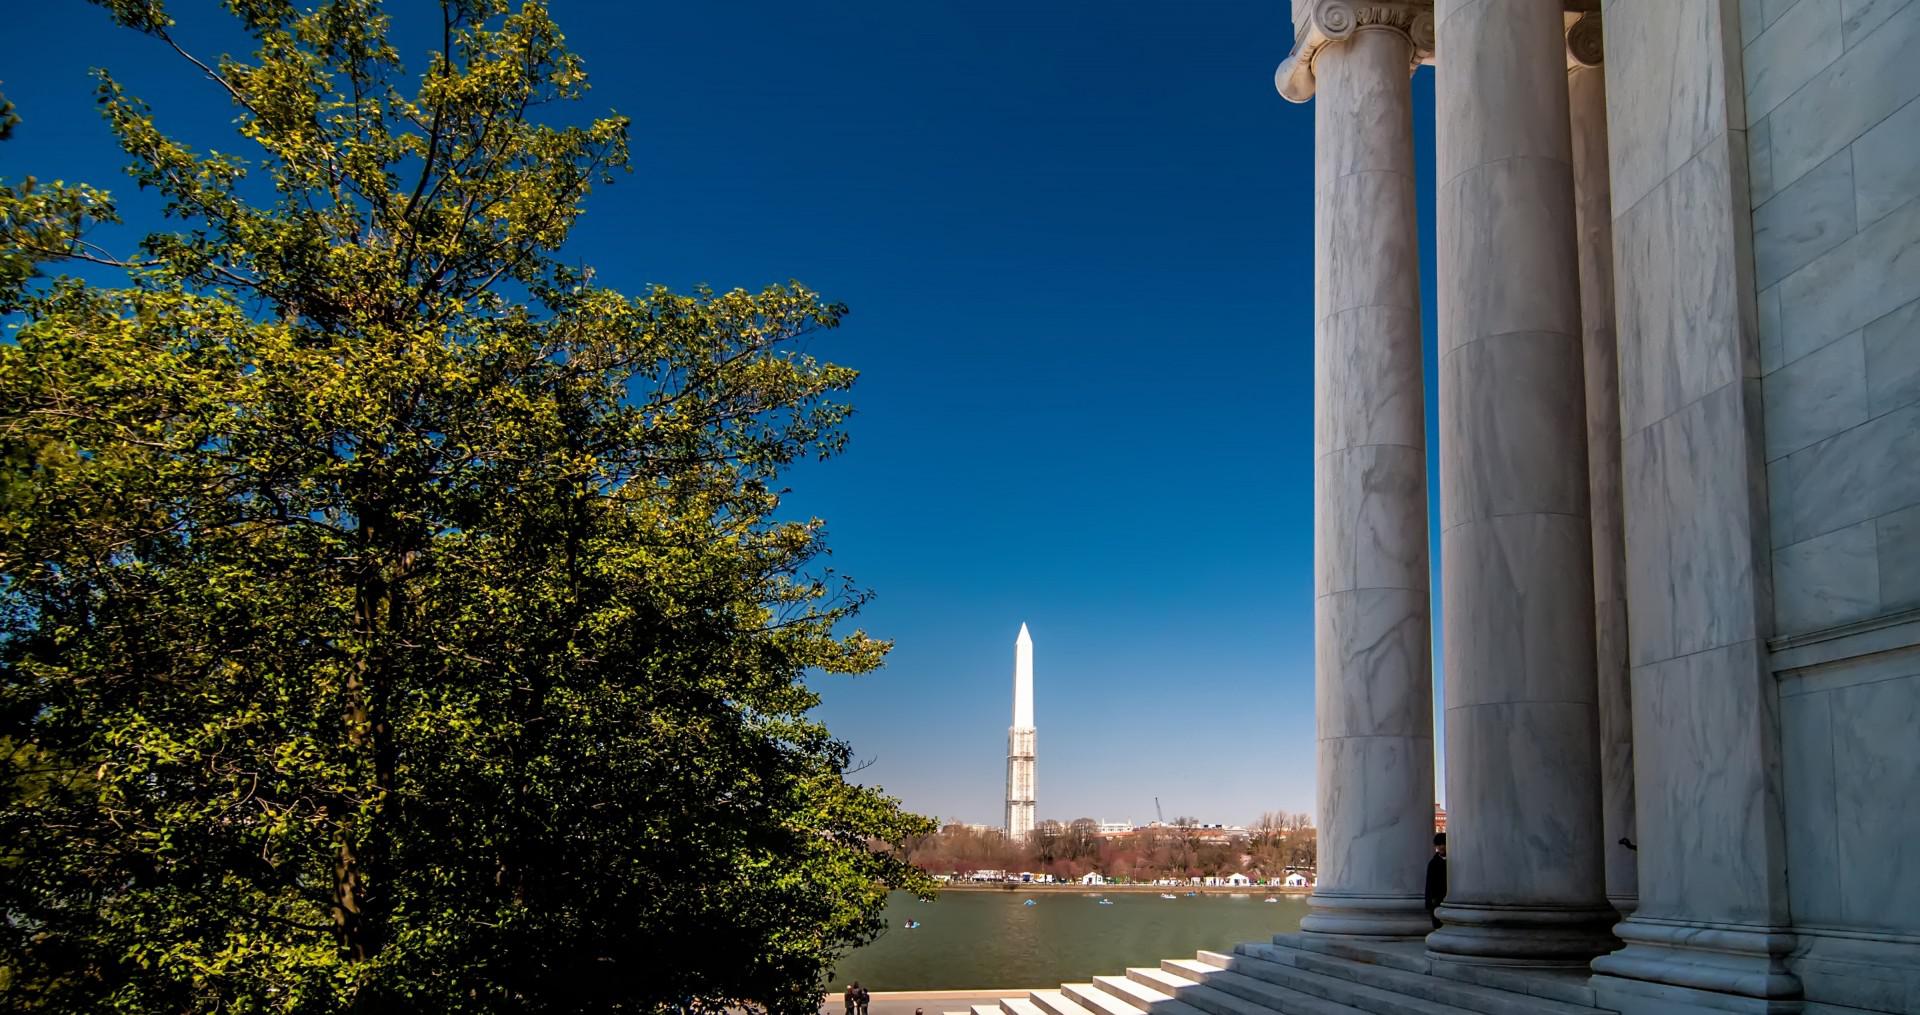 Washington Dc Monuments High Quality And Resolution